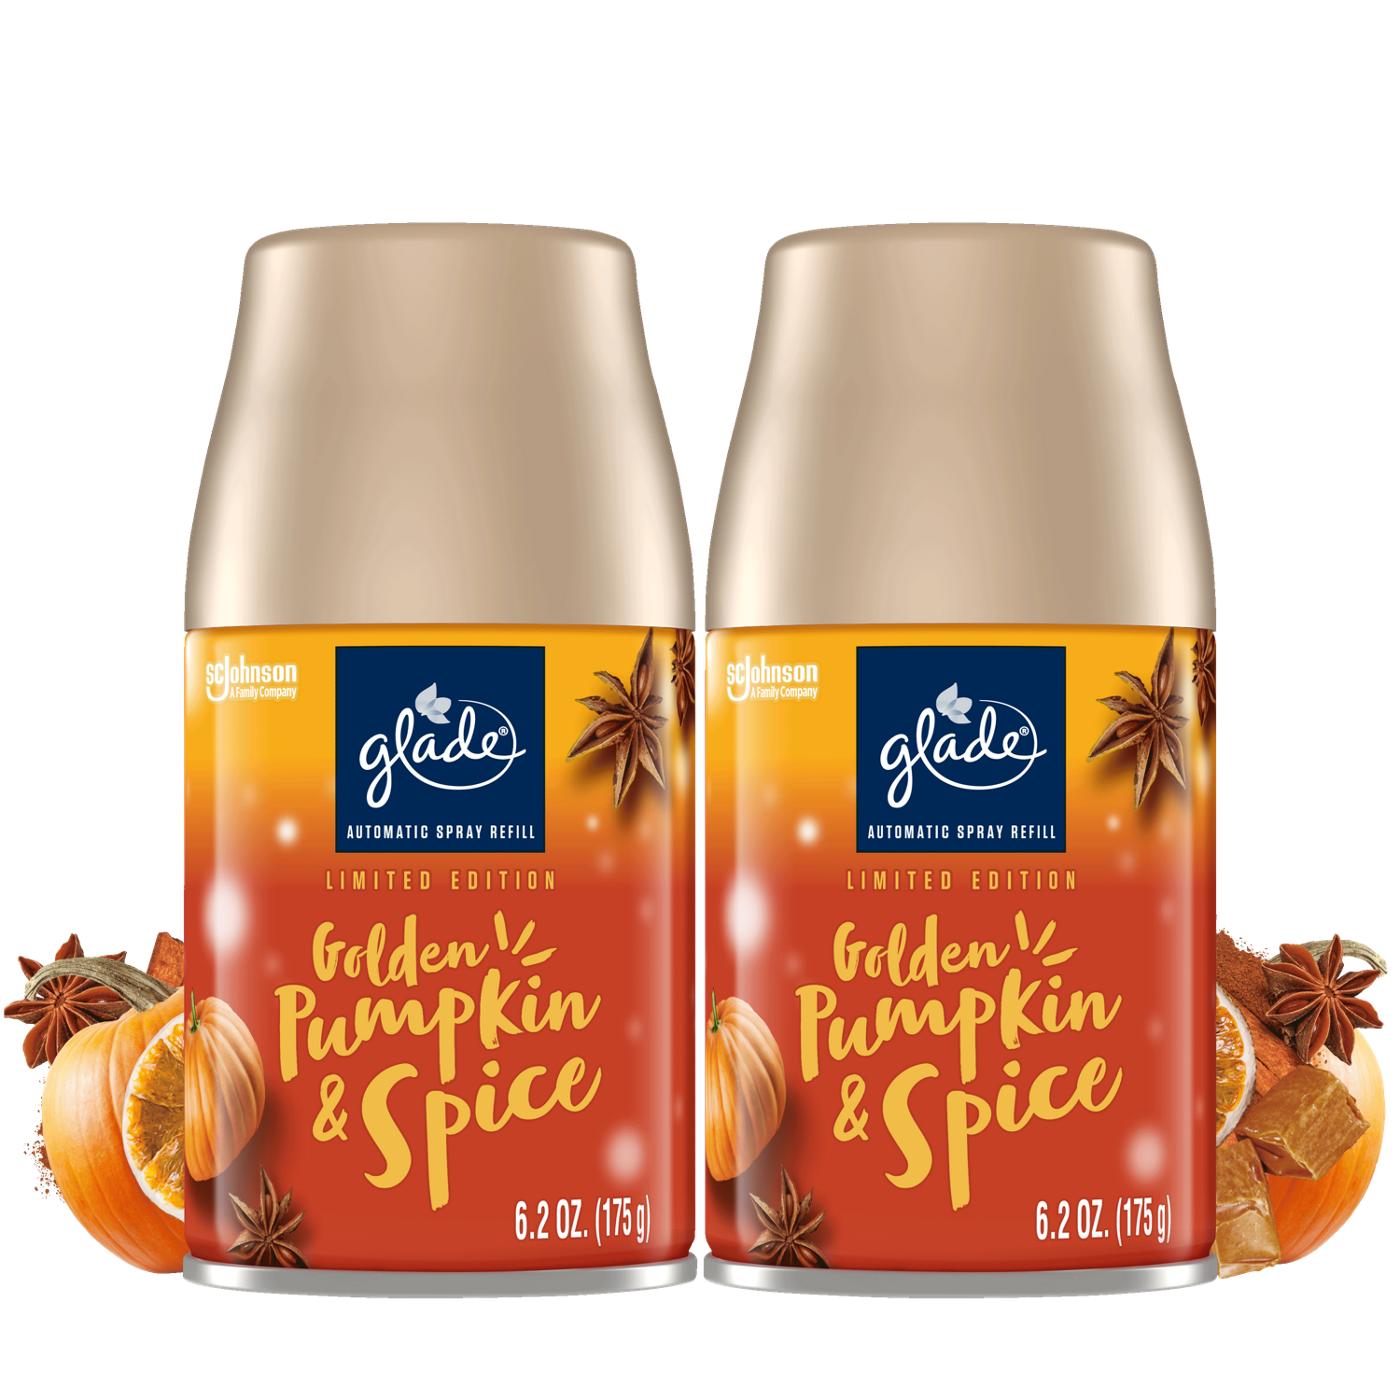 Glade Automatic Spray Refill, Value Pack - Golden Pumpkin & Spice; image 1 of 3